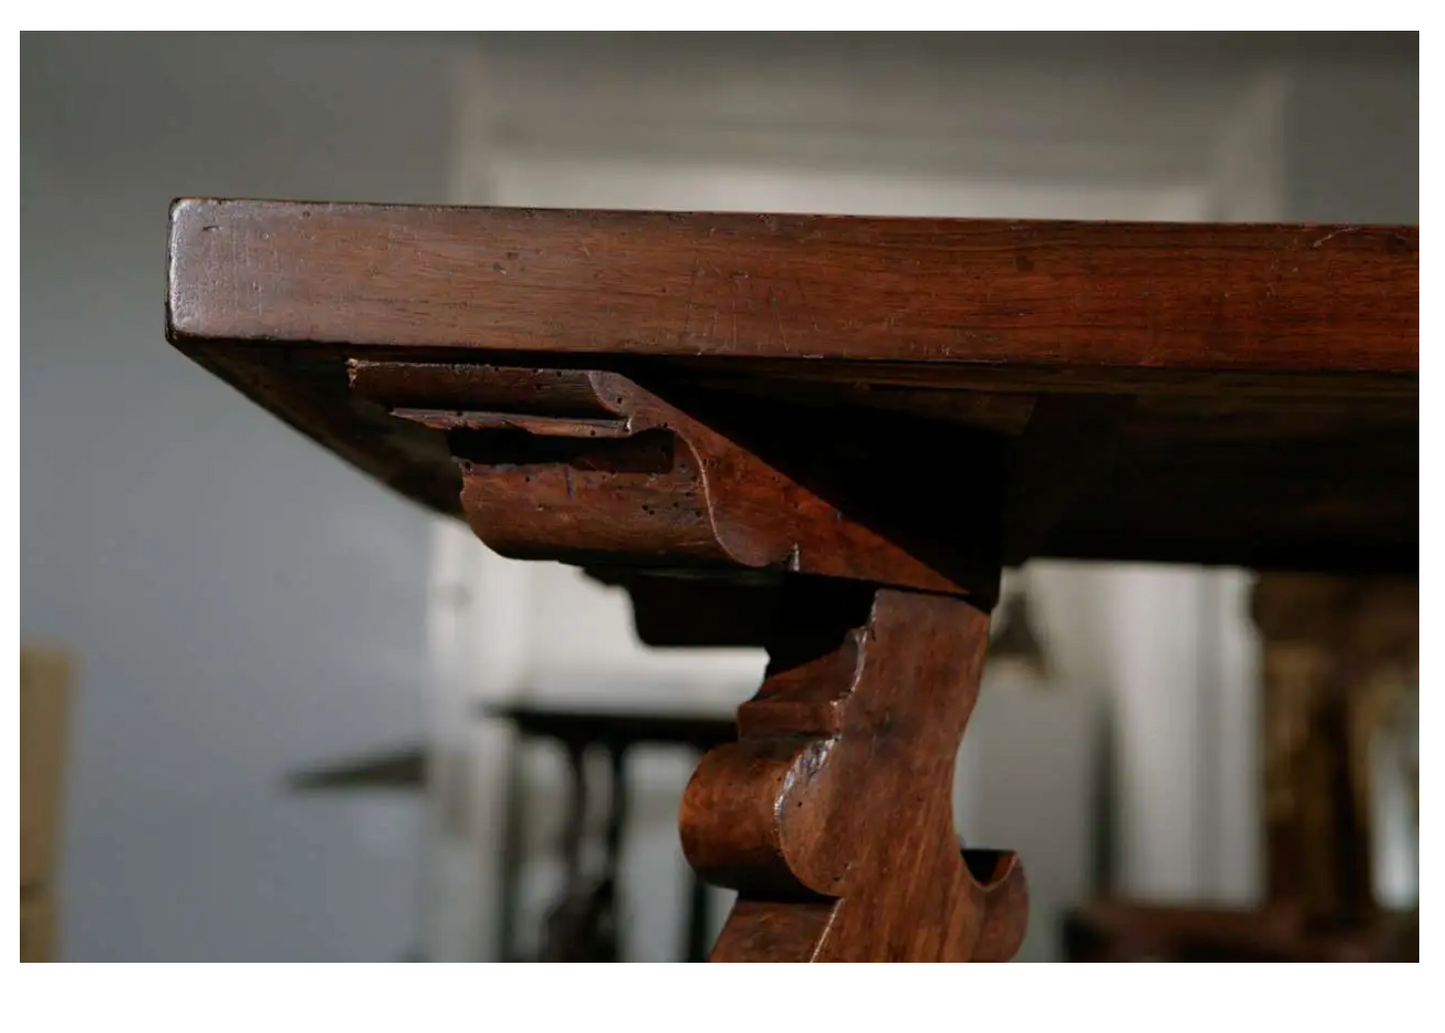 Tuscan Console Height Trestle Table